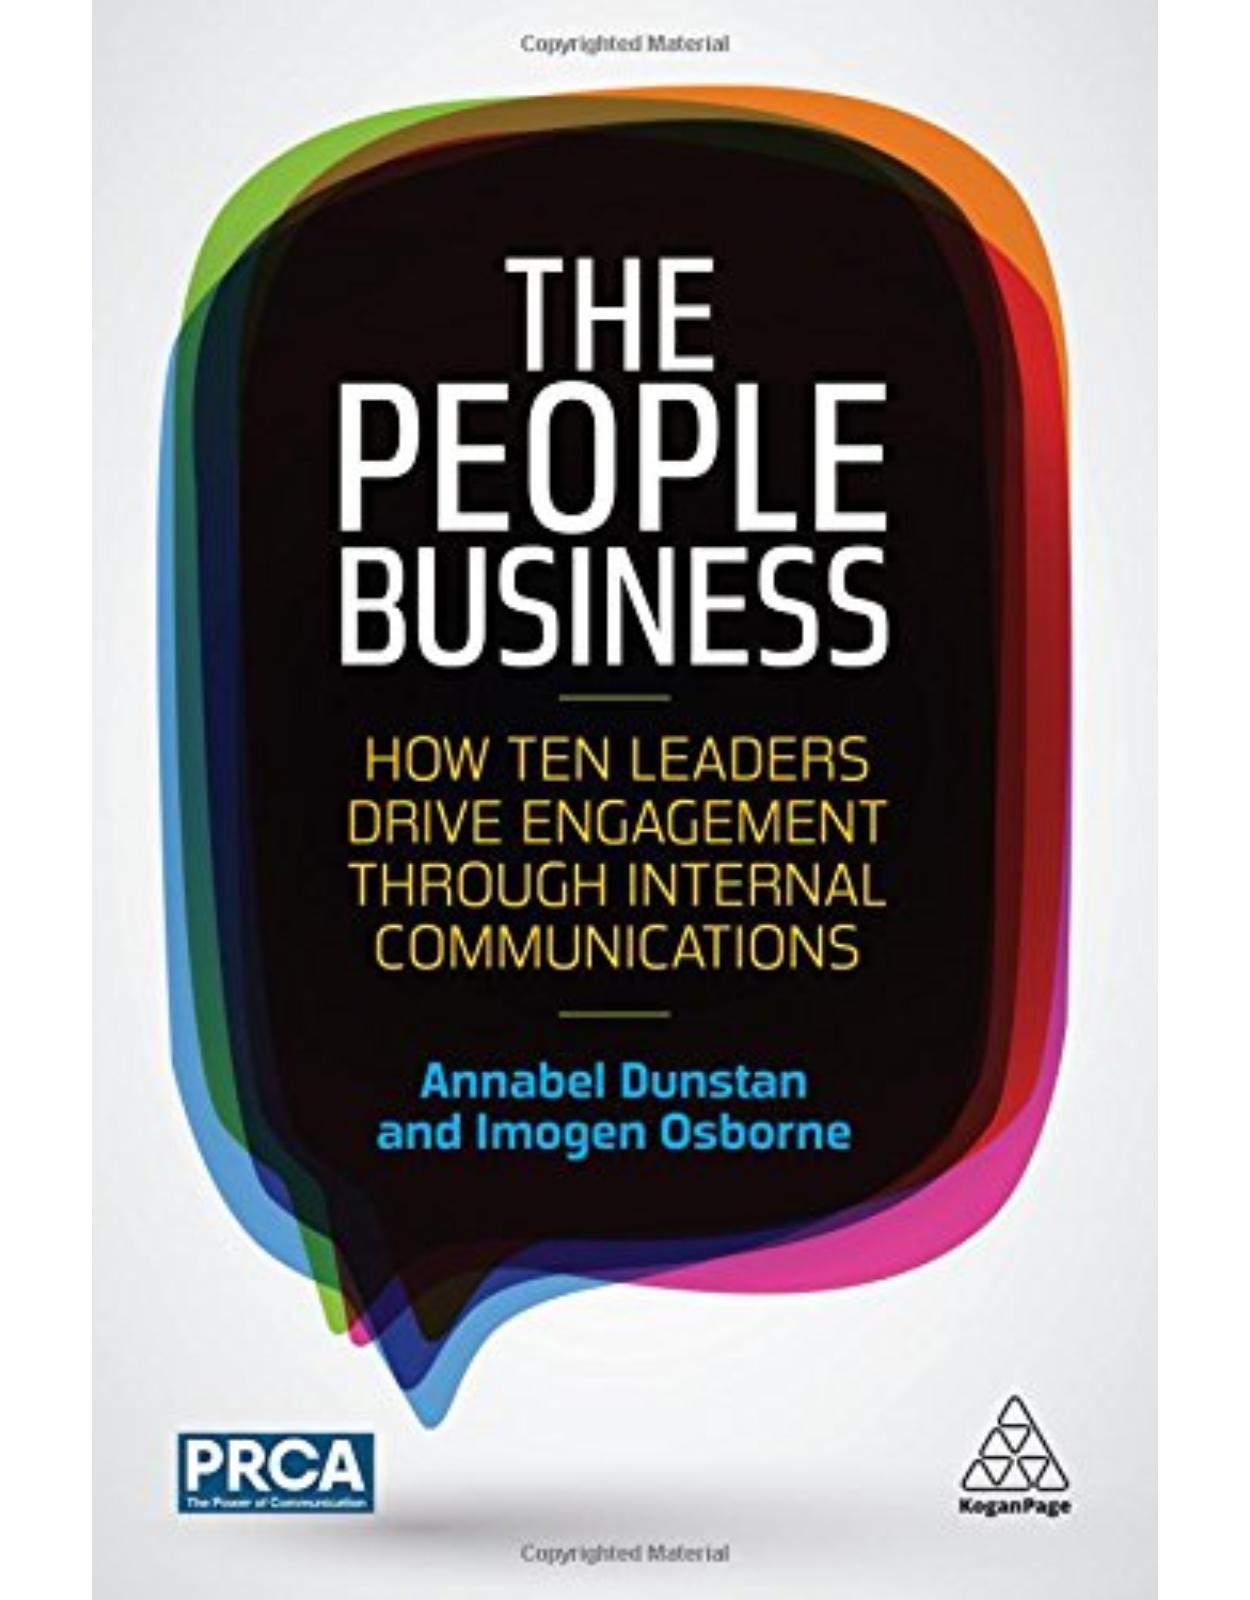 The People Business: How Ten Leaders Drive Engagement Through Internal Communications